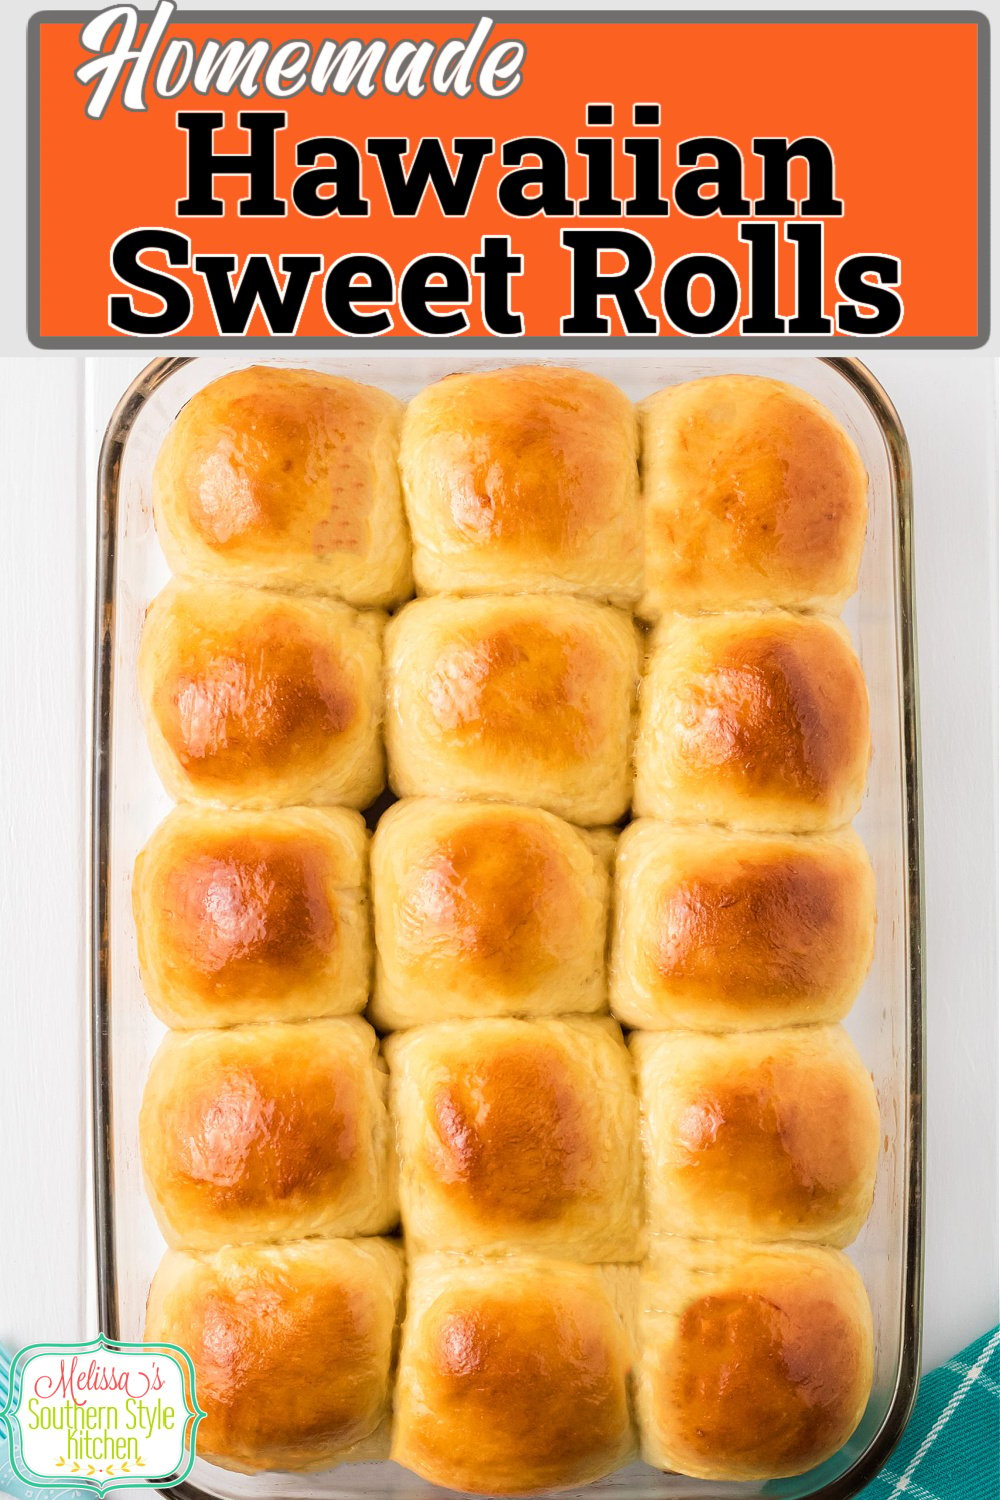 These Homemade Hawaiian Sweet Rolls are sweet and buttery making them a delicious choice for serving at any meal #hawaiiansweetrolls #copycatHawaiiansrolls #homemaderolls #rollsrecipe #easyrolls #dinnerrolls via @melissasssk